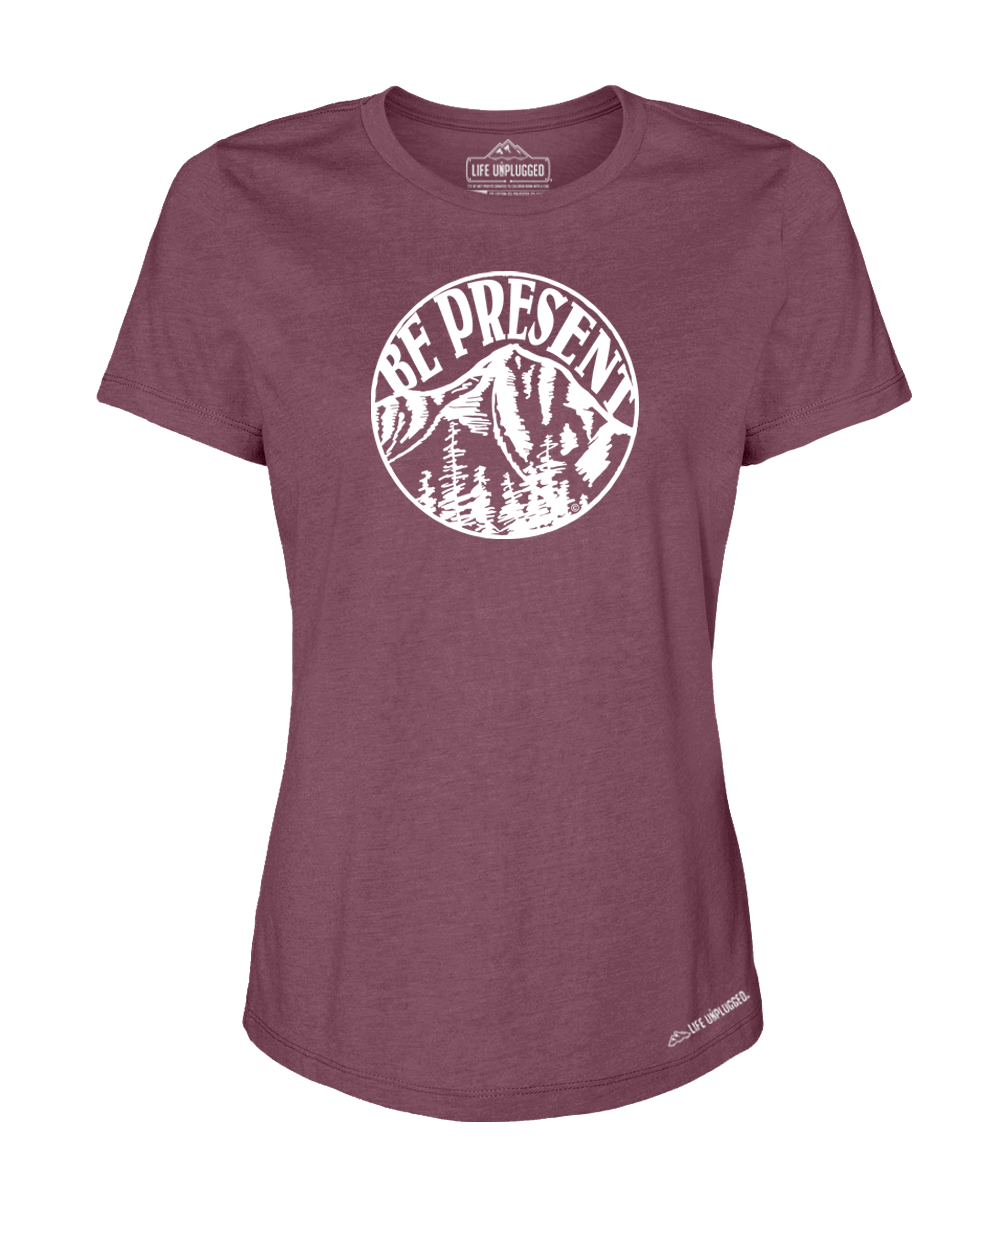 Be Present Mountain Premium Women's Relaxed Fit Polyblend T-Shirt - Life Unplugged